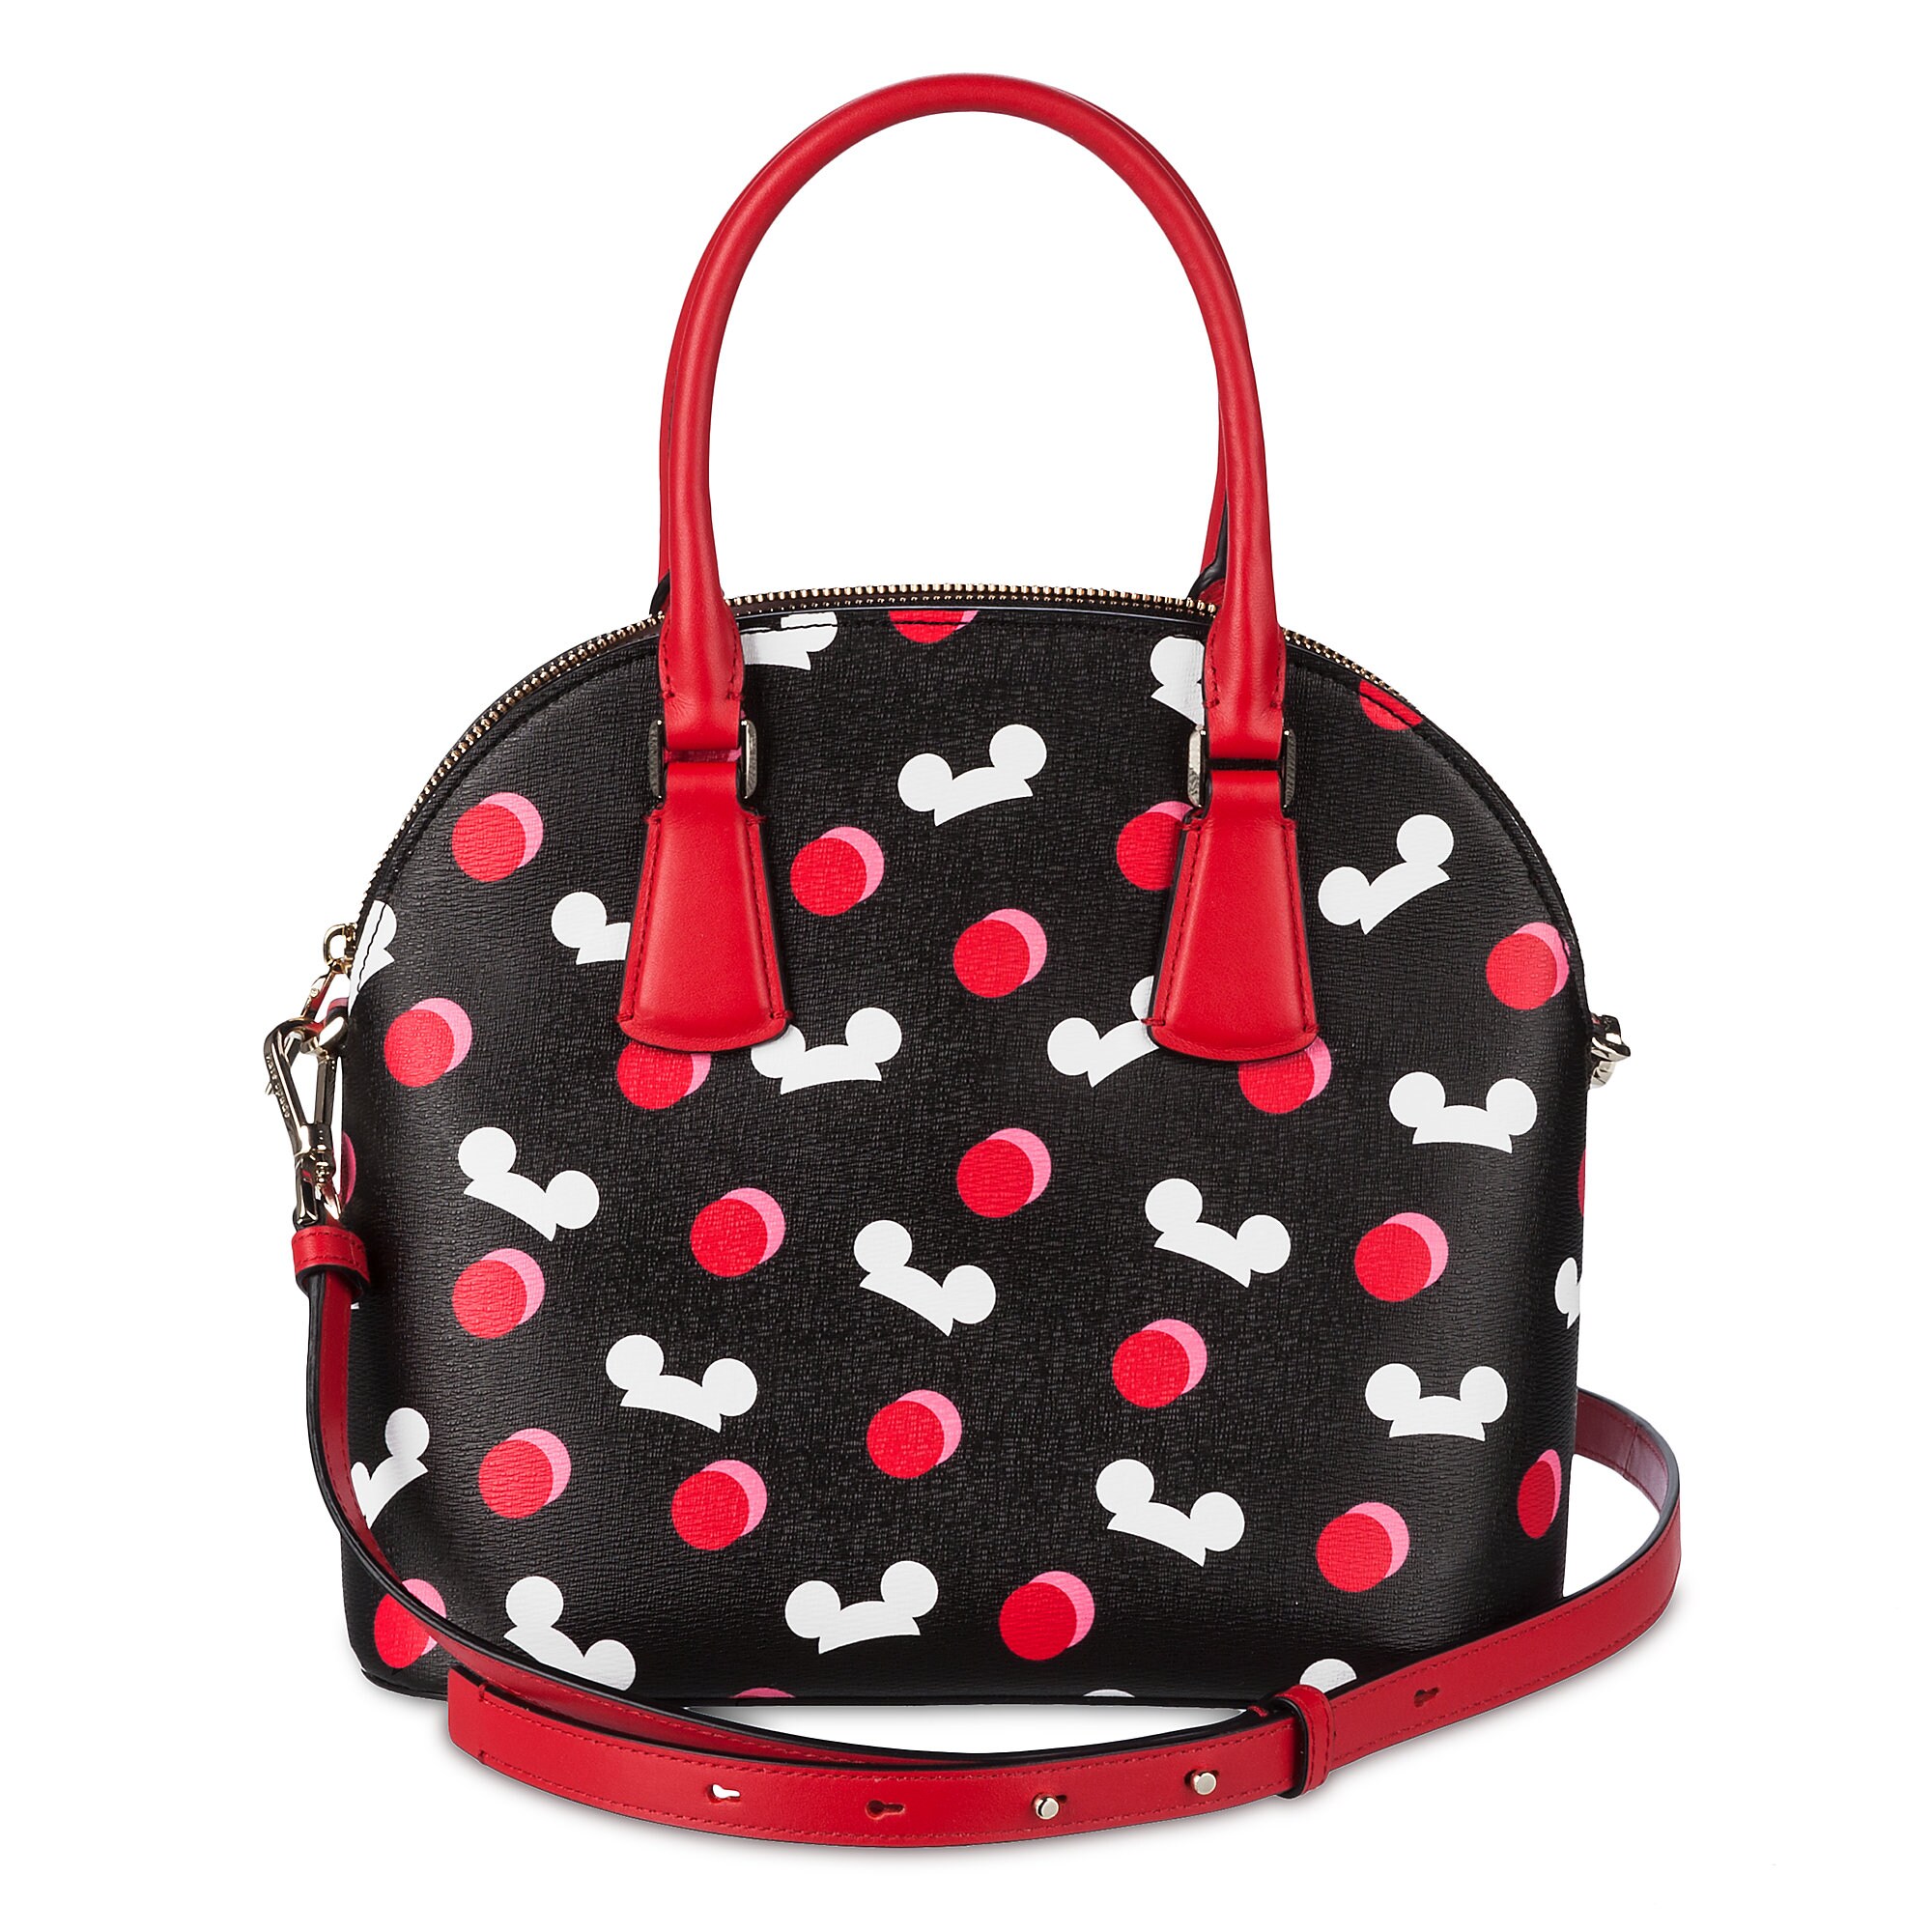 Mickey Mouse Ear Hat Satchel by kate spade new york - Black now ...